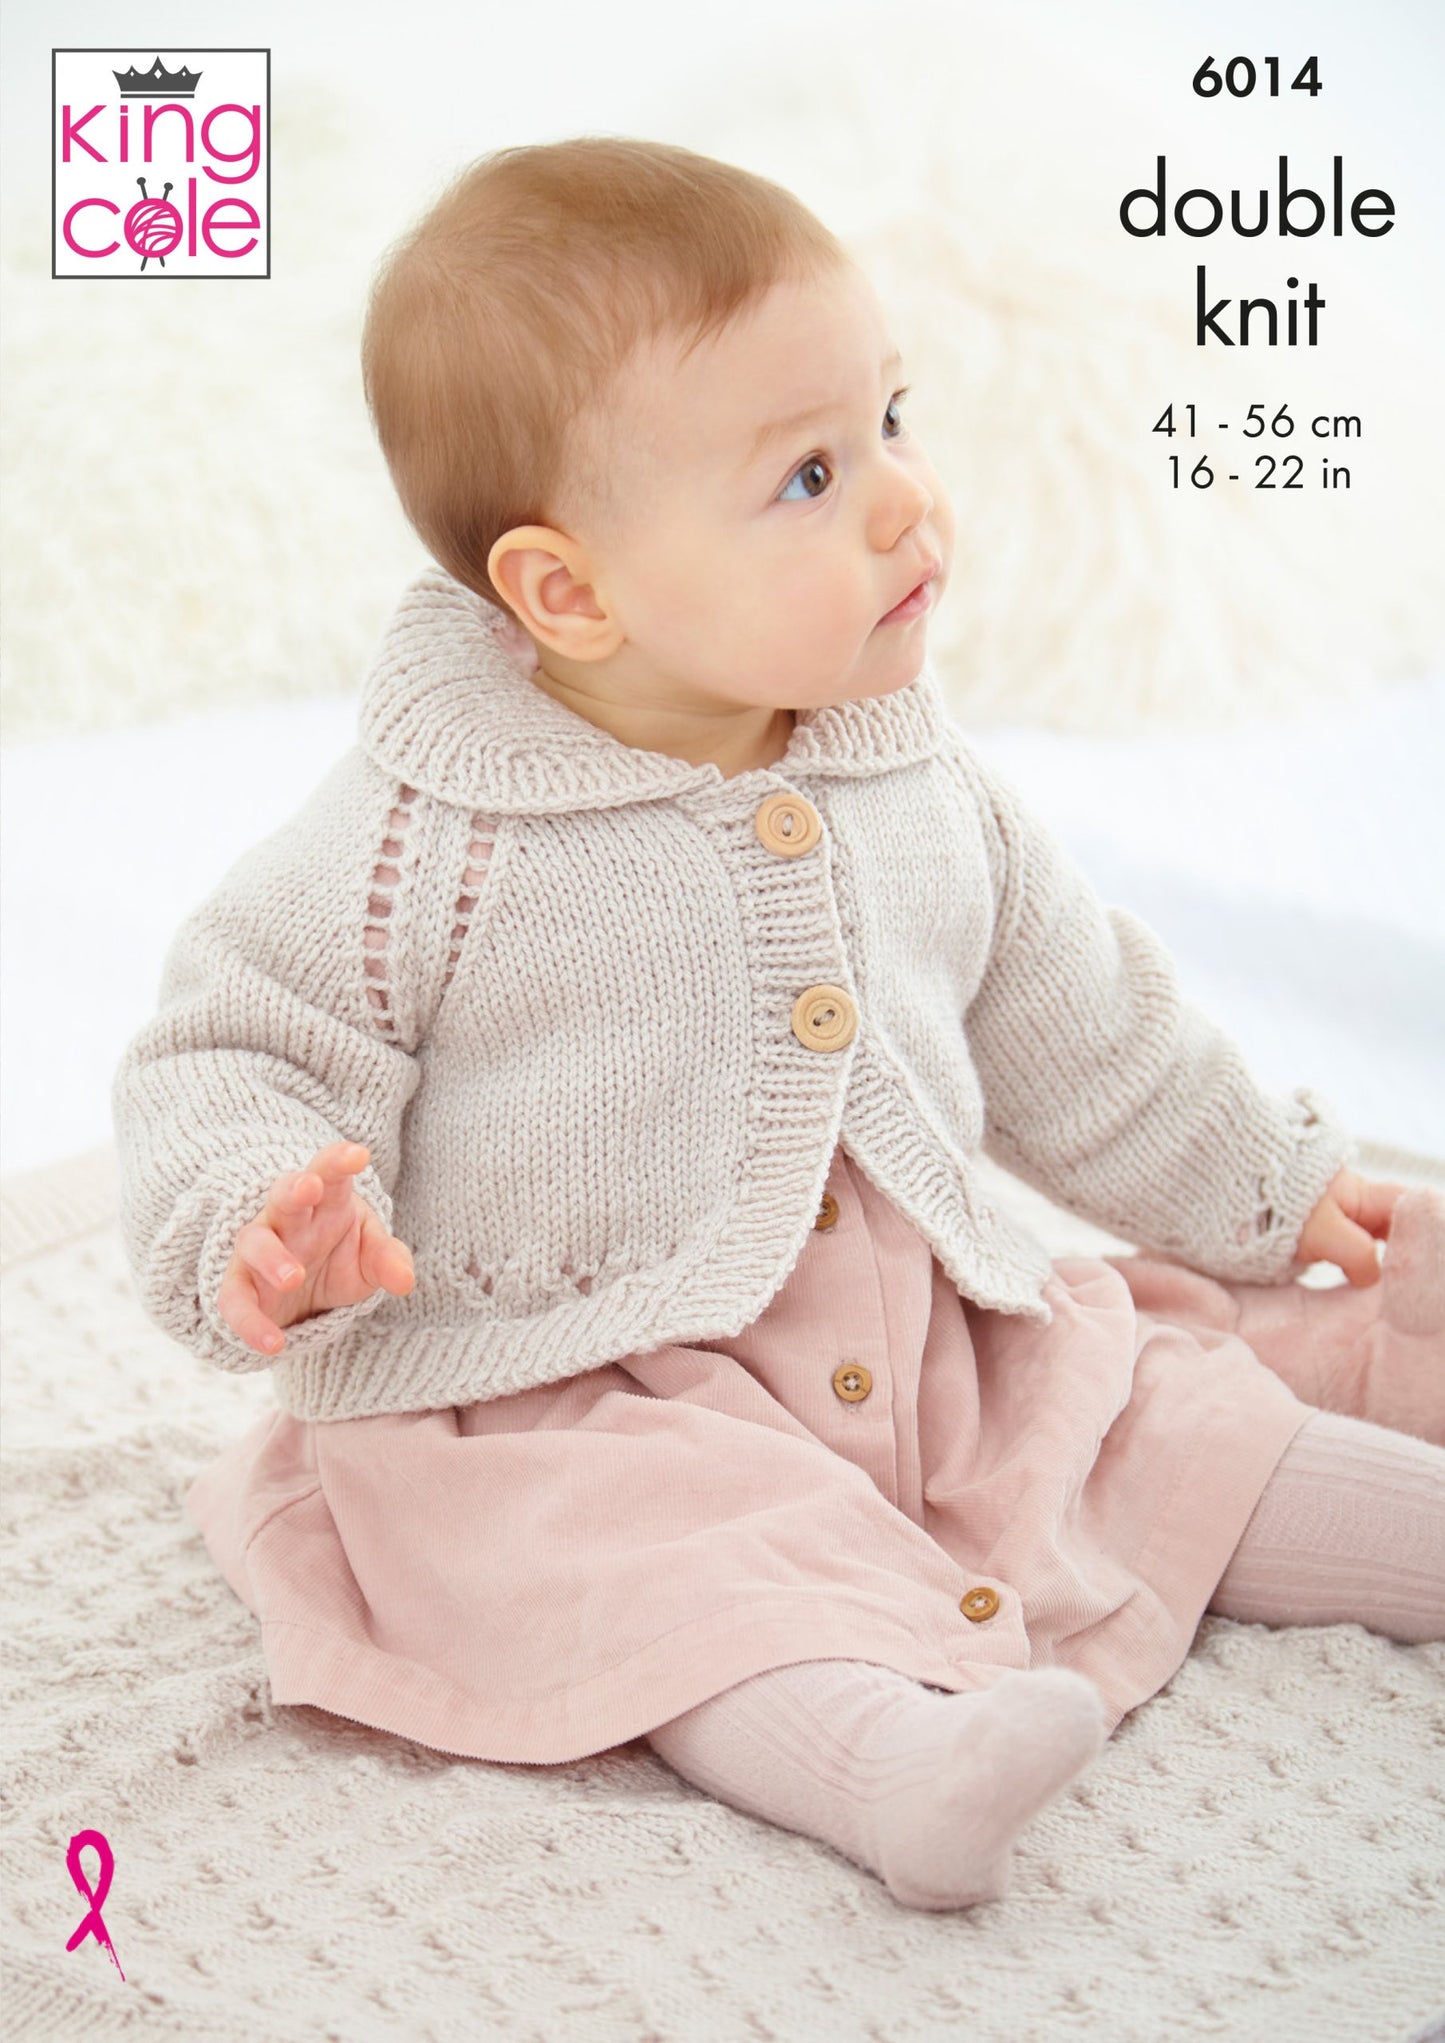 Knitting Pattern 6014 - Jacket, Cardigans and Blanket in King Cole Comfort Baby DK